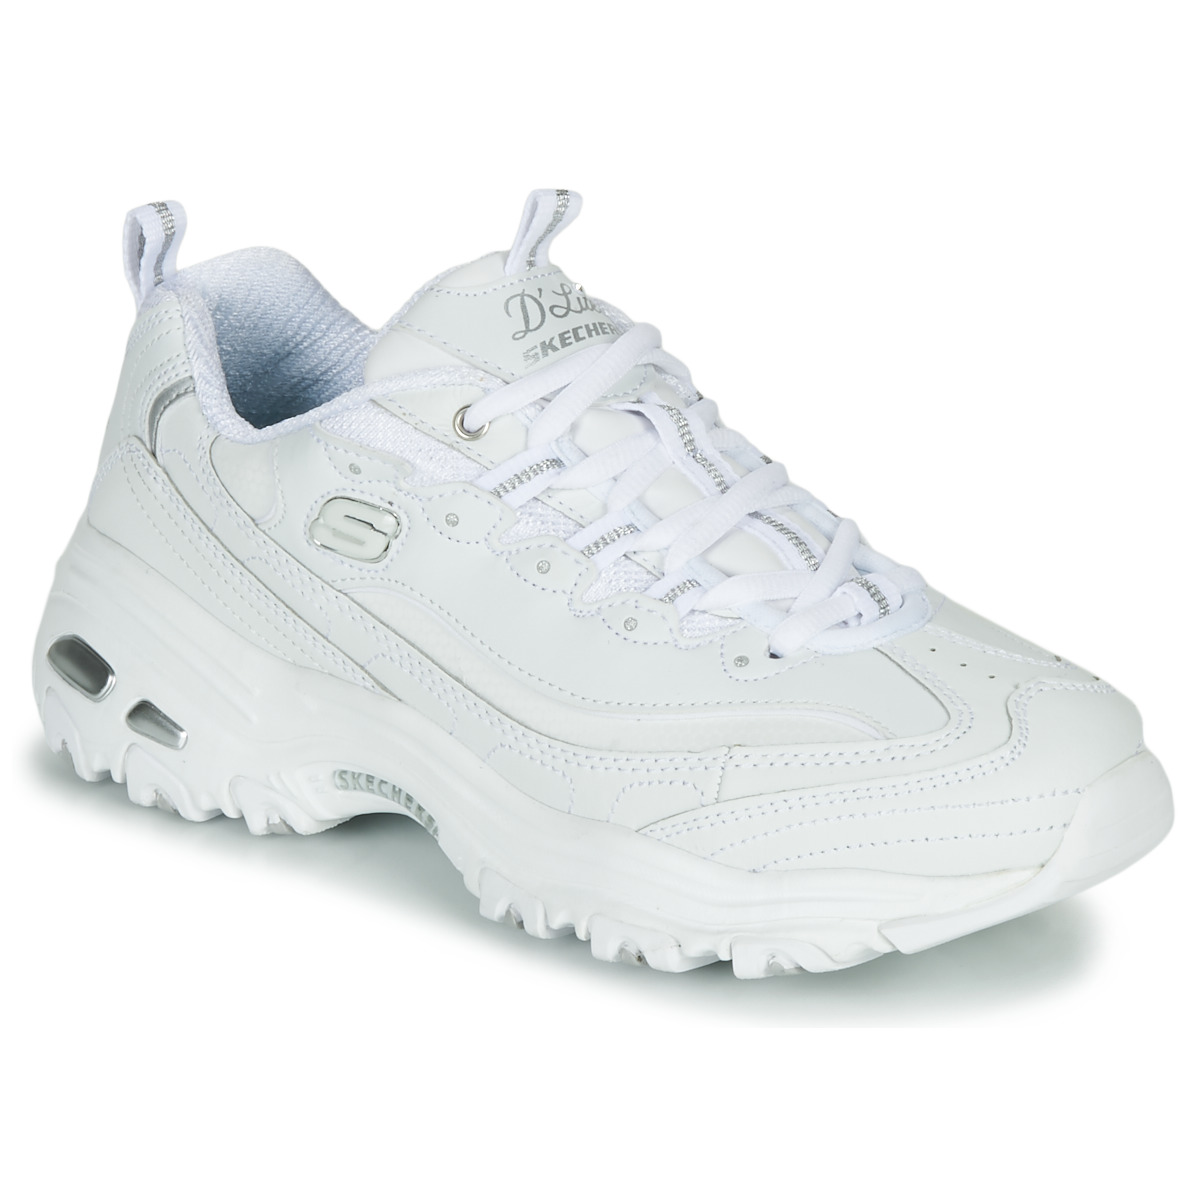 Skechers D'LITES White - Free delivery | Spartoo NET ! - Shoes Low